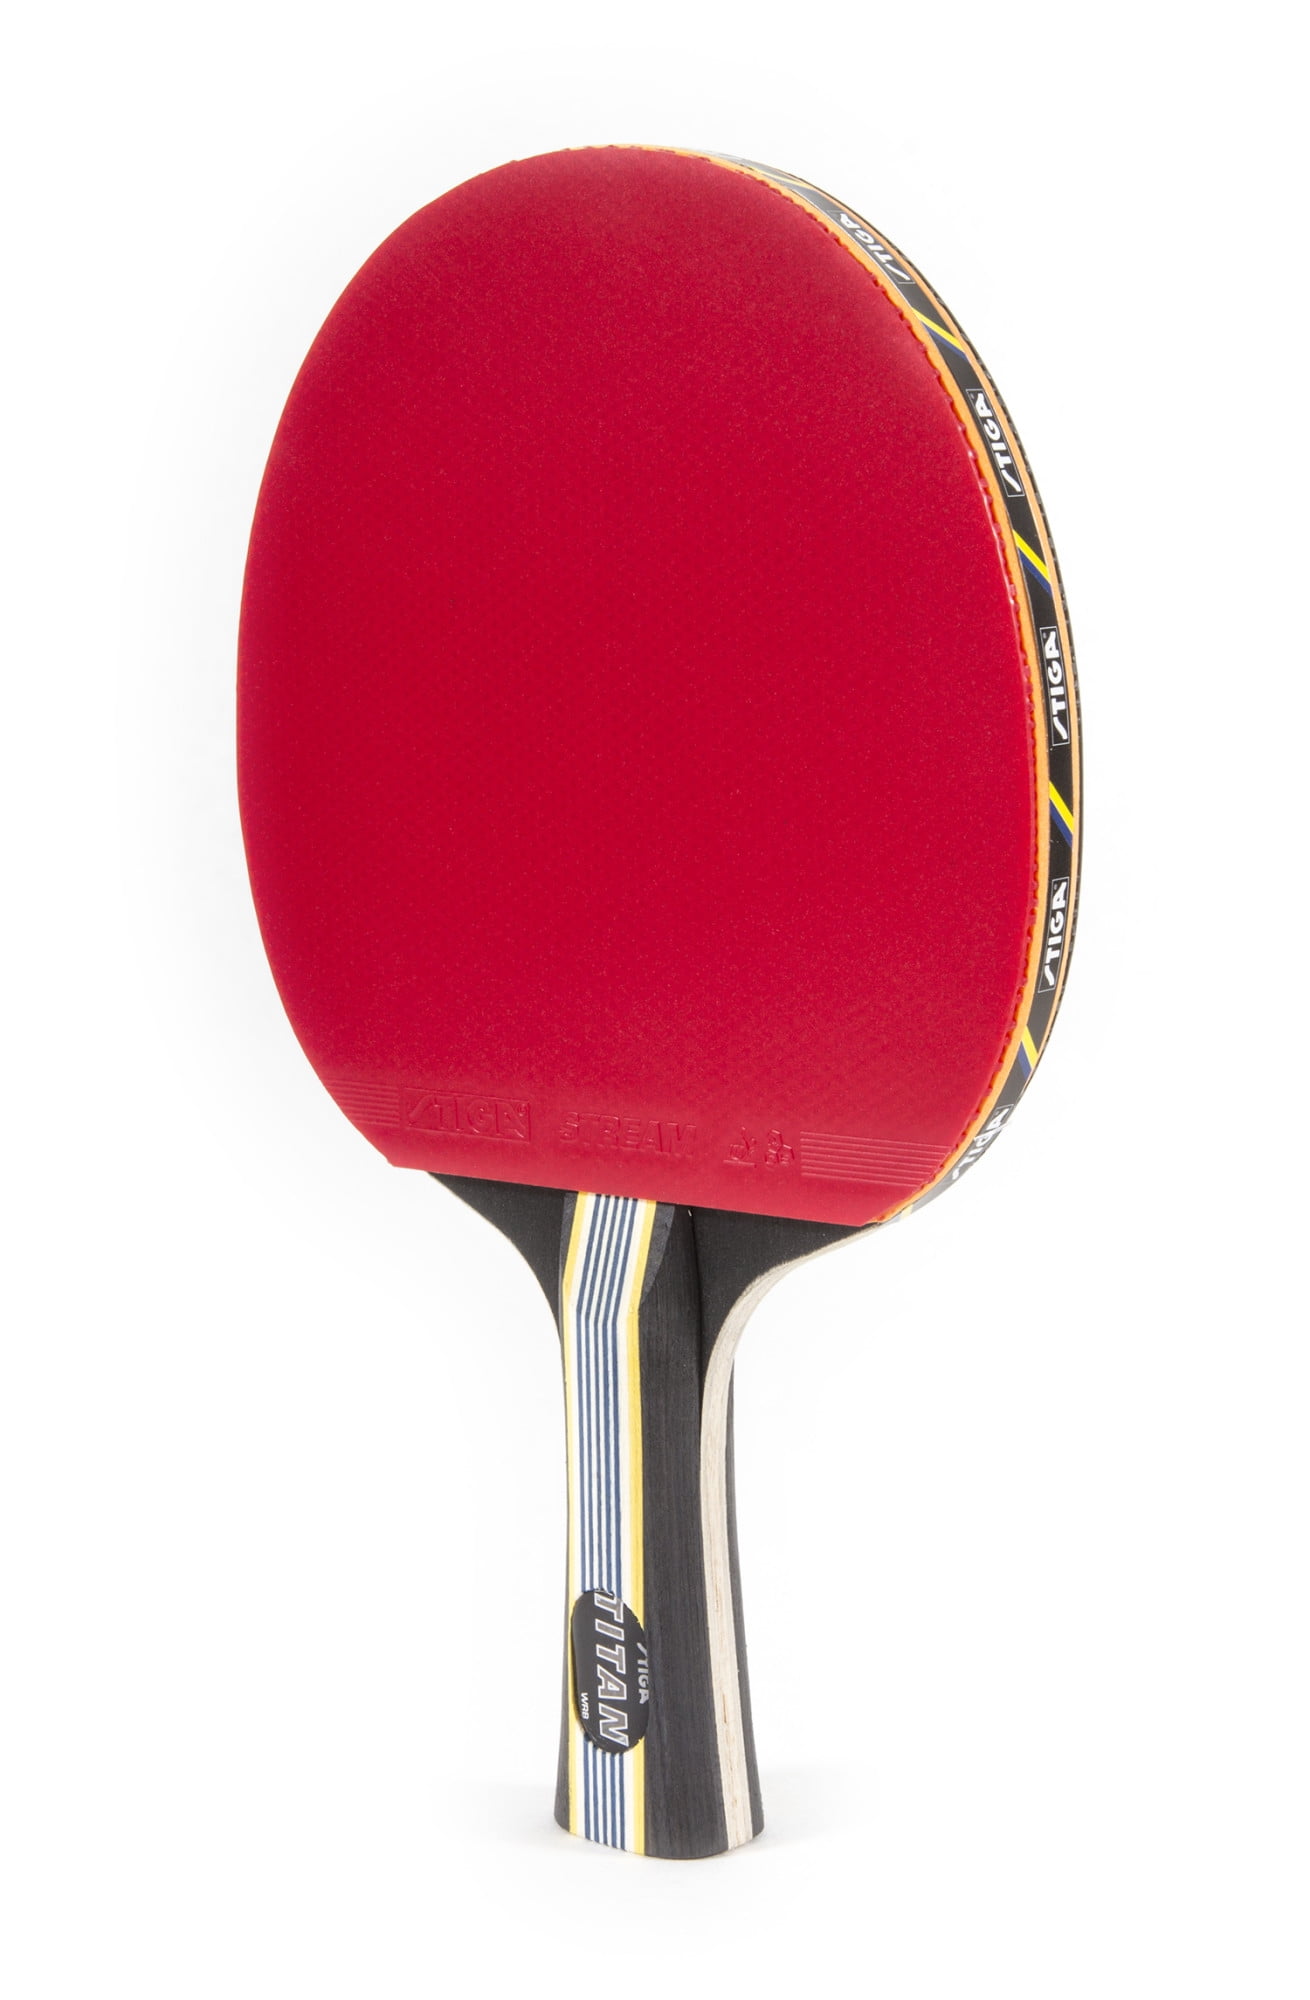 Details about   Stiga Supreme Tournament Ping Pong Paddles/Table Tennis Paddles-Set of 2 